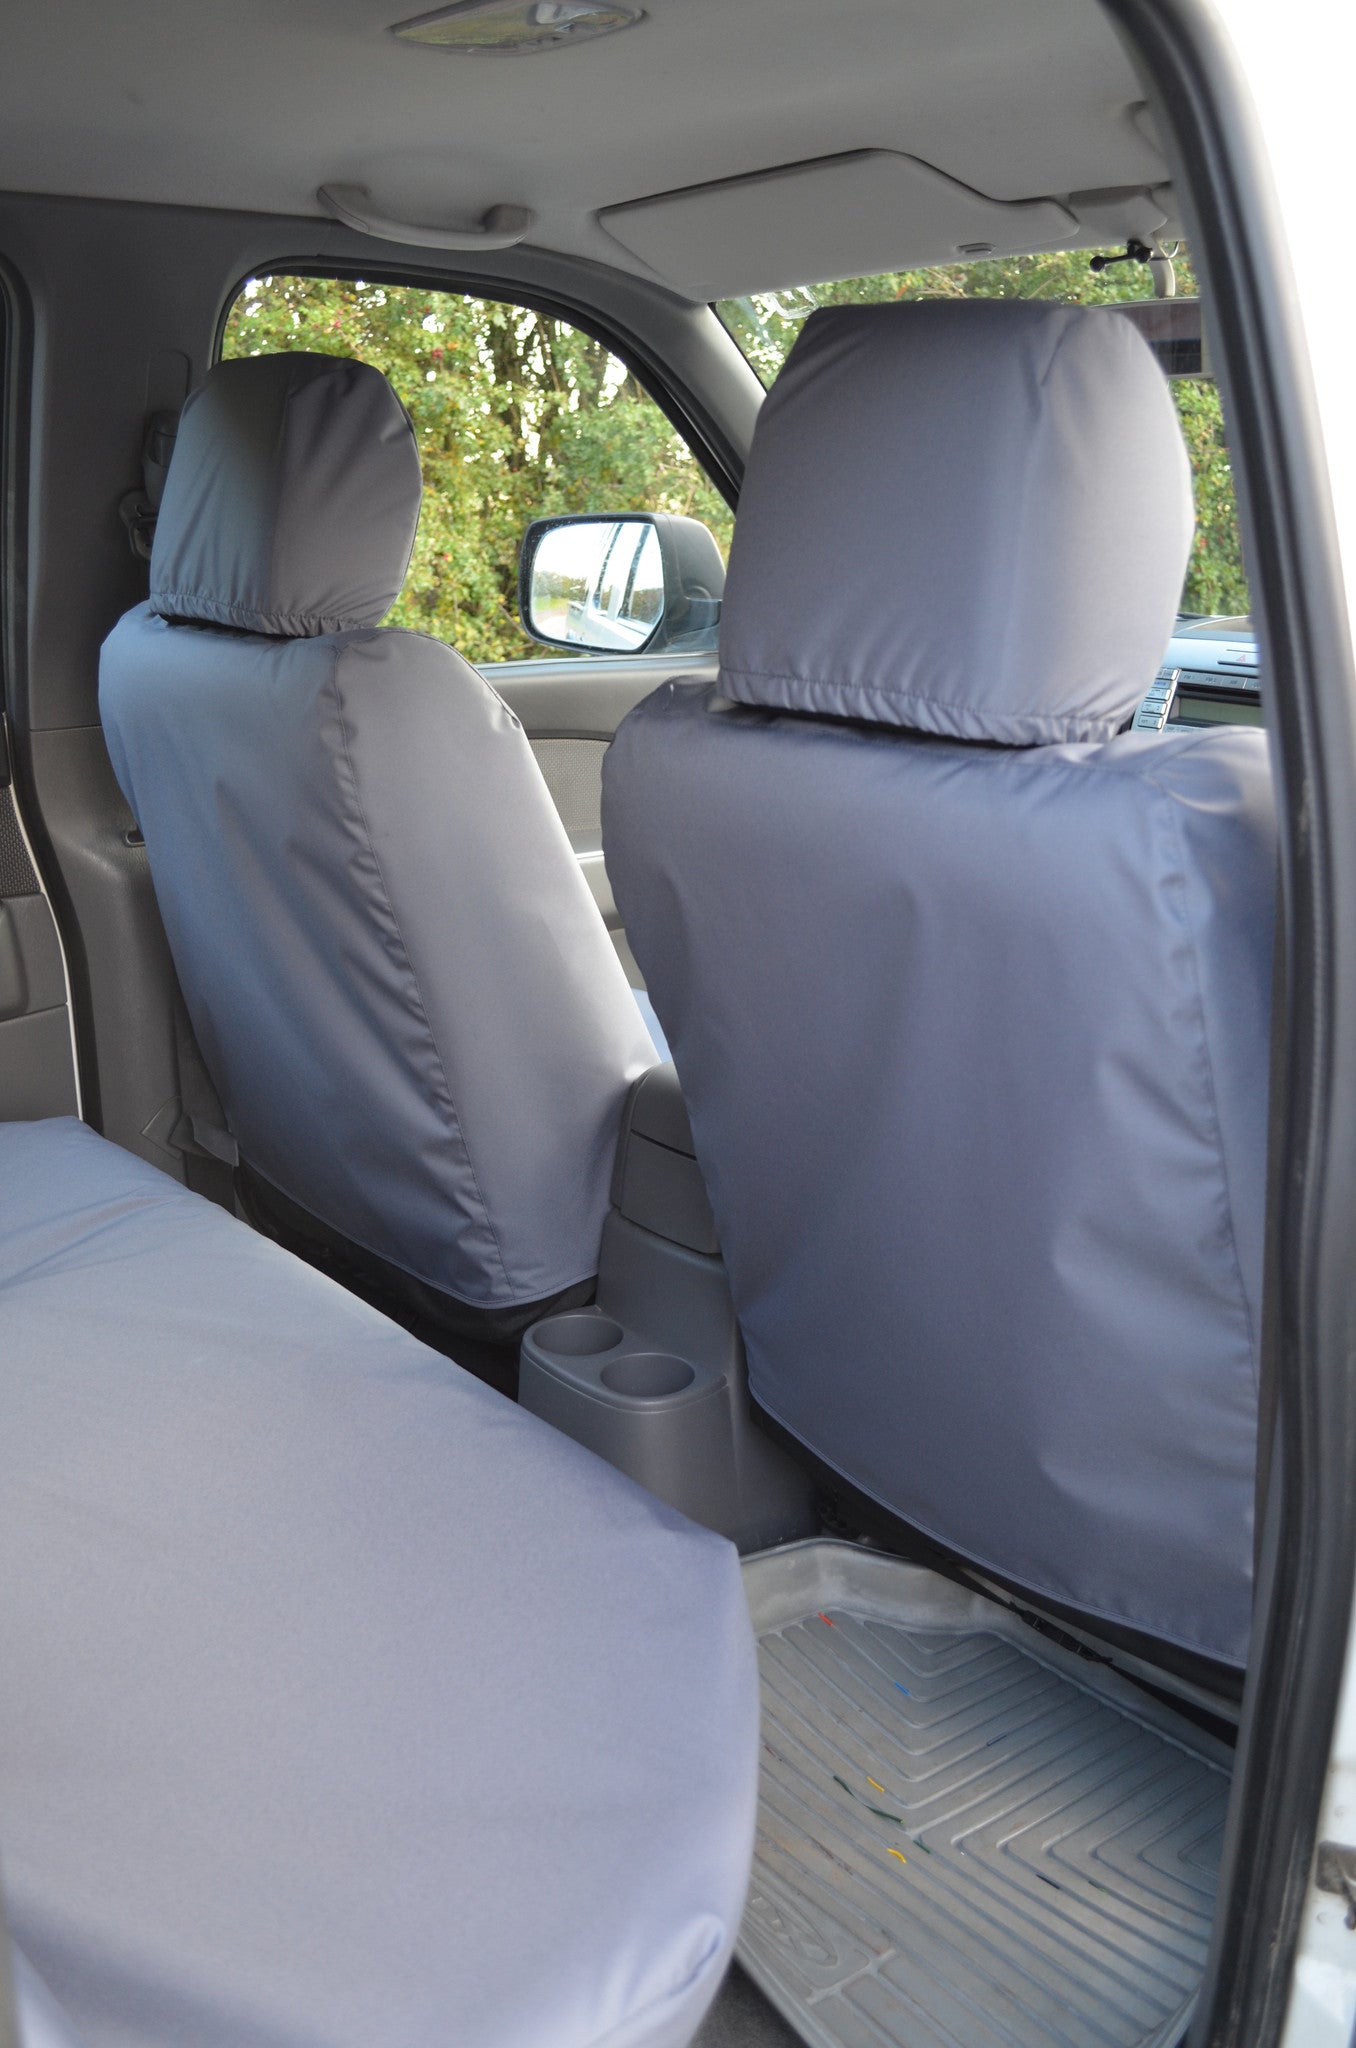 Ford Ranger 2006 to 2012 Seat Covers  Turtle Covers Ltd